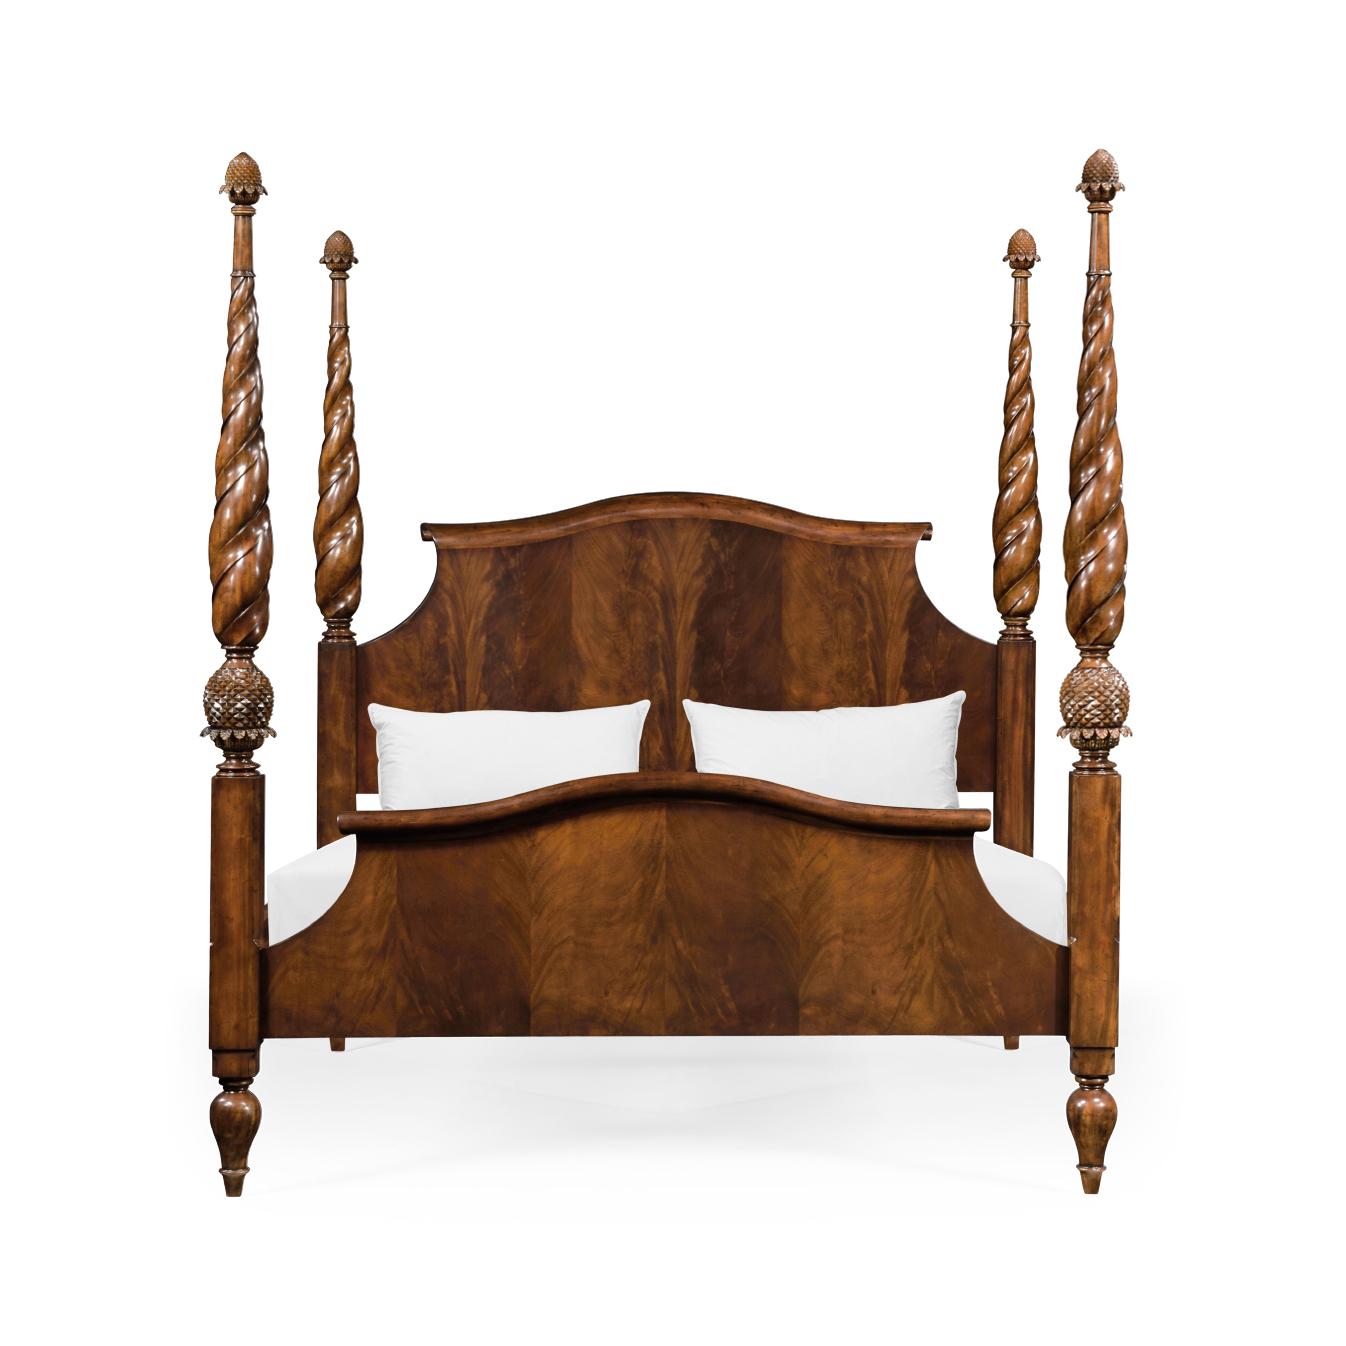 An elegant American plantation style carved mahogany bed with fluted rope twist tapered carved posts with beautifully hand carved acorn finials and an arched headboard of figured mahogany with a scroll top, the frame, and footboard of figured